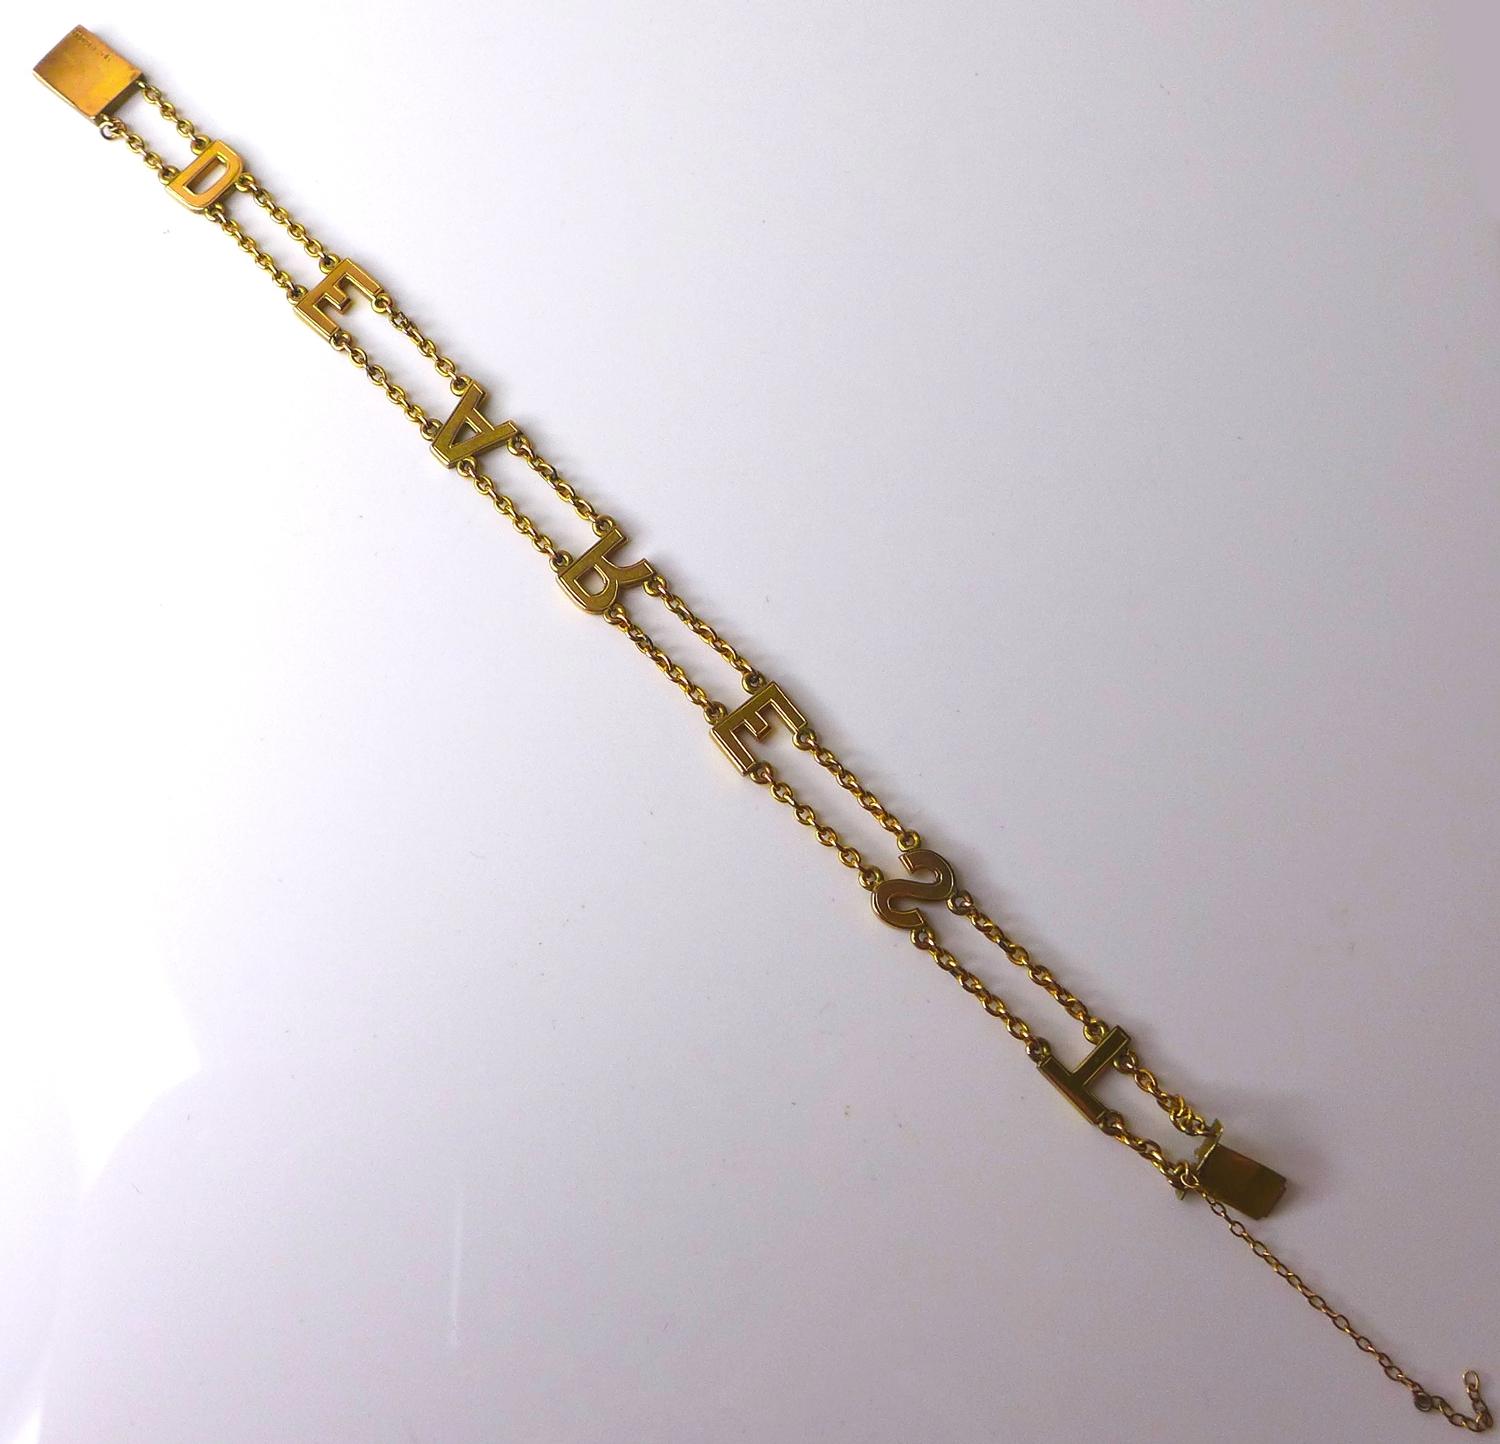 A 9ct gold 'Dearest' chain bracelet, early 20th century, stamped '9ct GOLD', 19cm, 10.4g. - Image 3 of 5